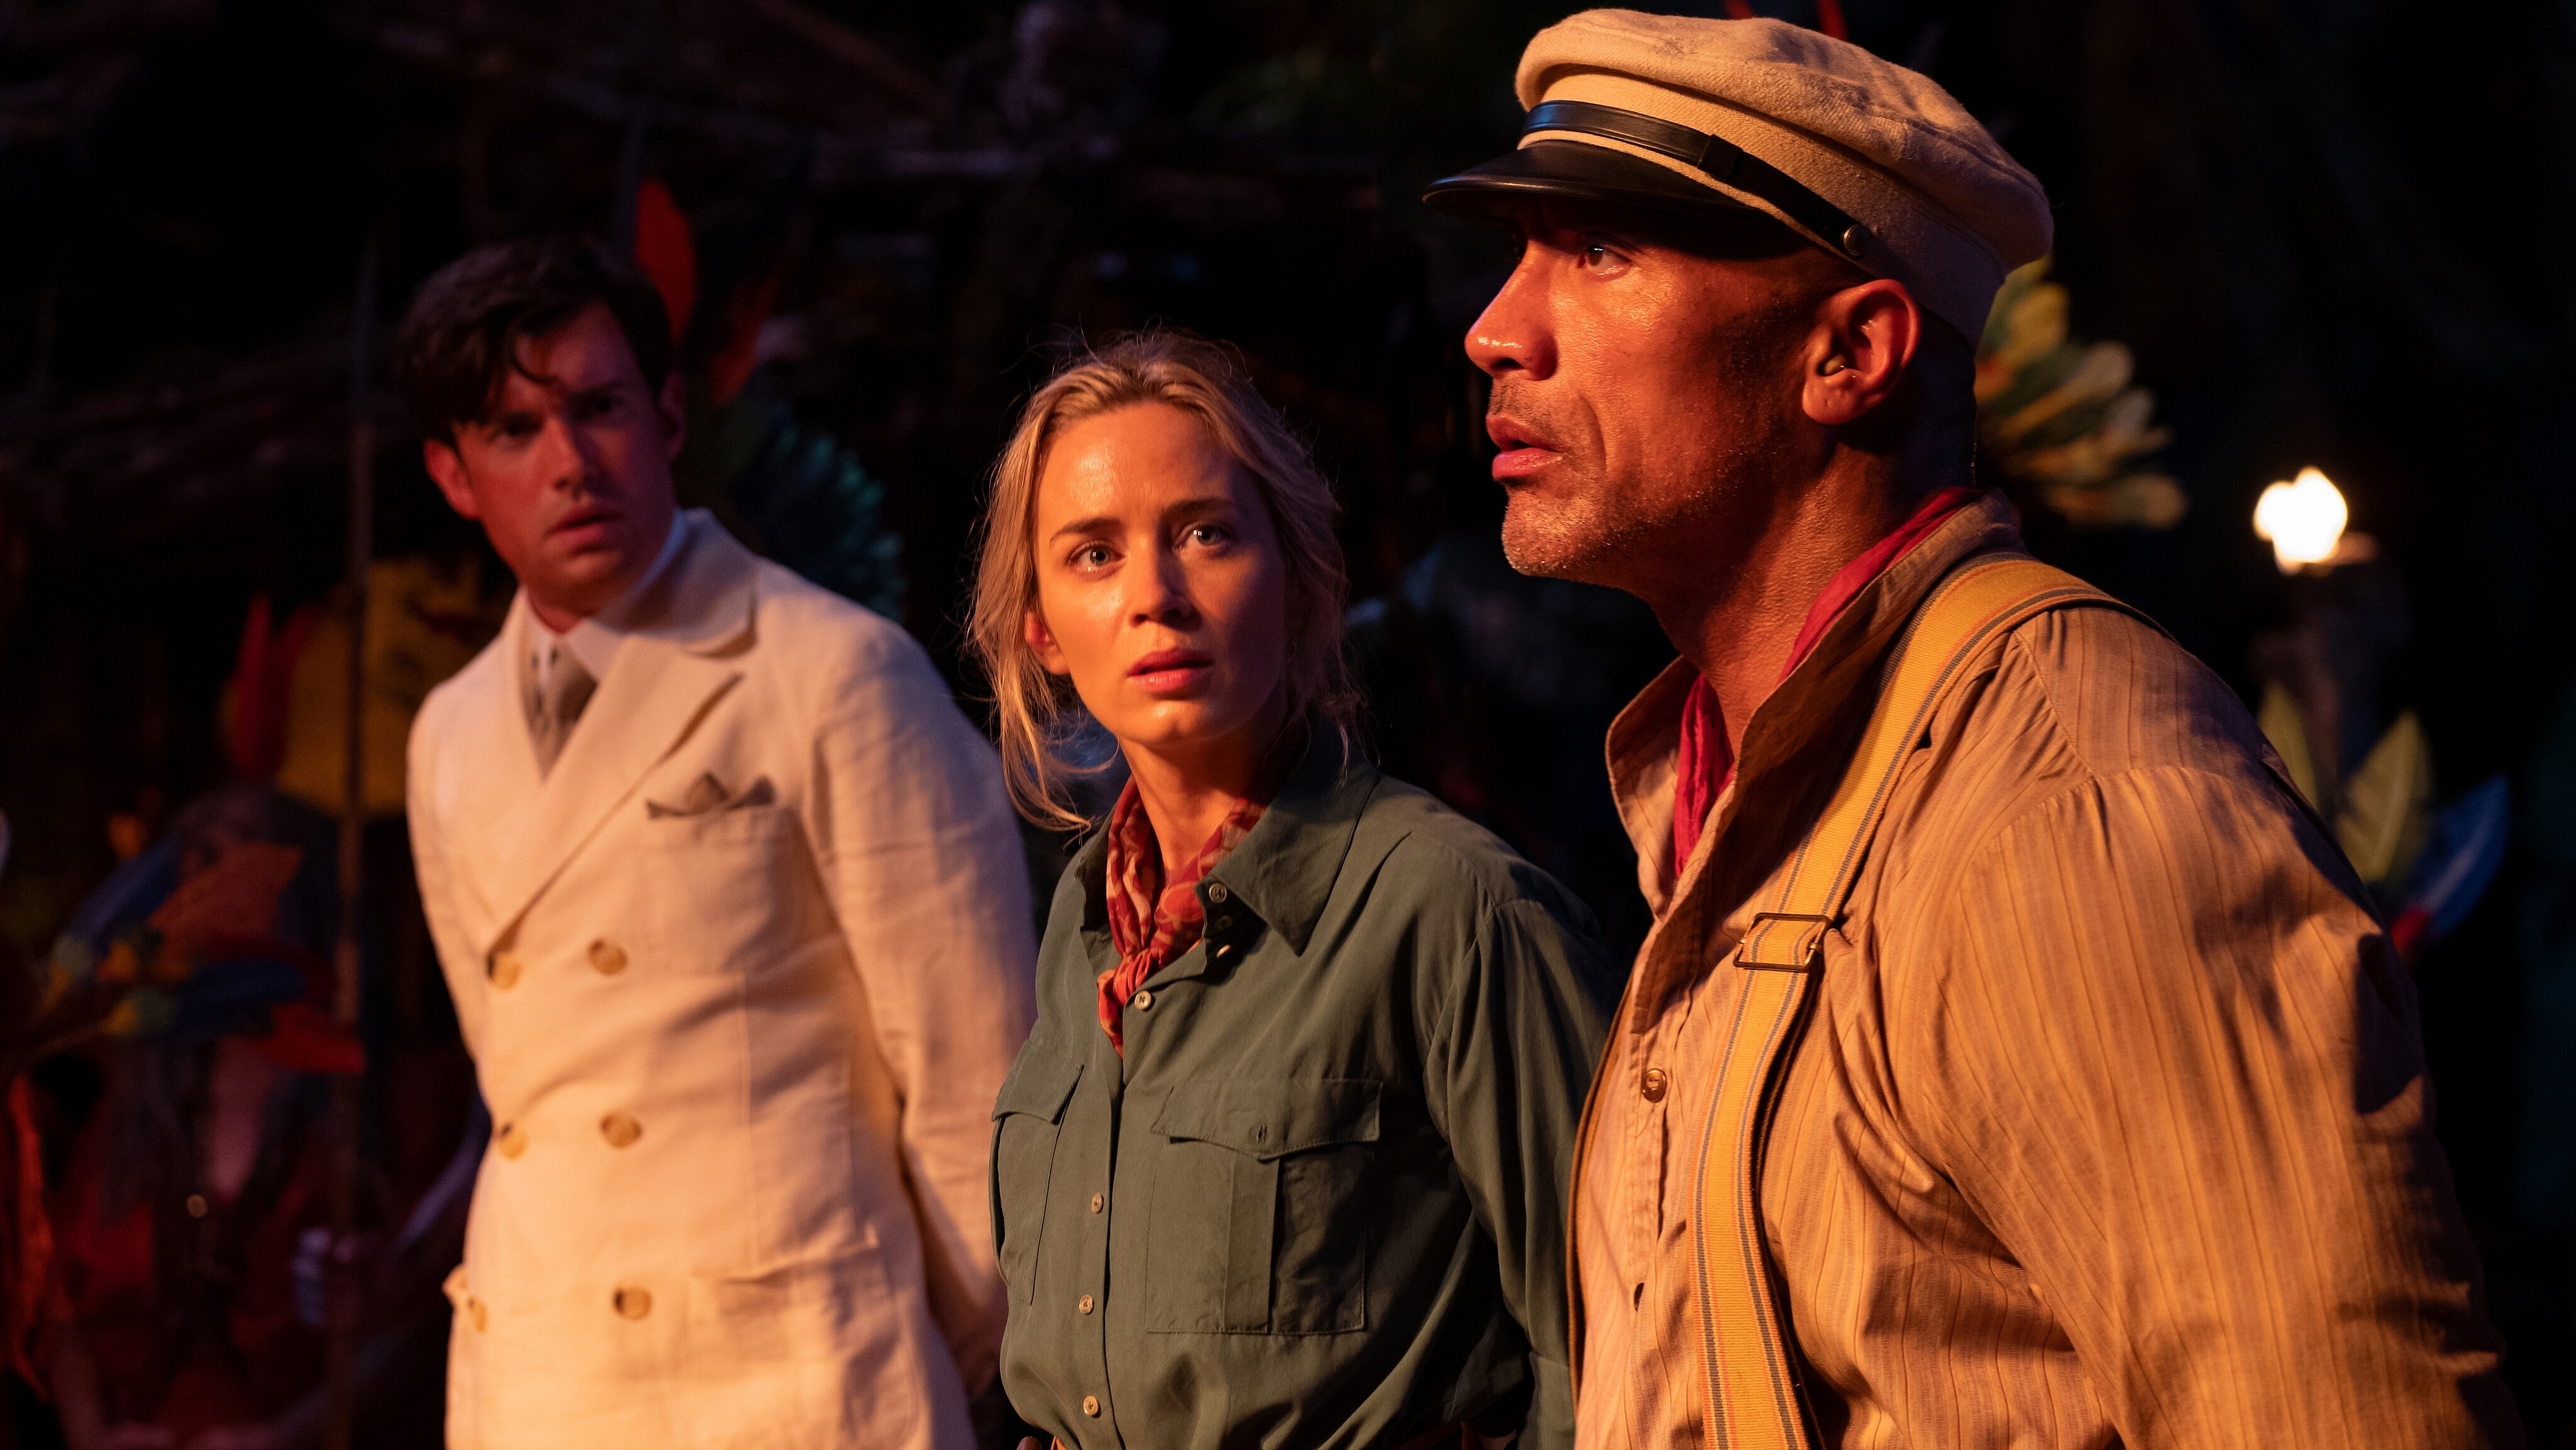 New Trailer Released For Disney’s “Jungle Cruise” Starring Dwayne Johnson And Emily Blunt Coming To Theaters And On Disney+ With Premier Access July 30 